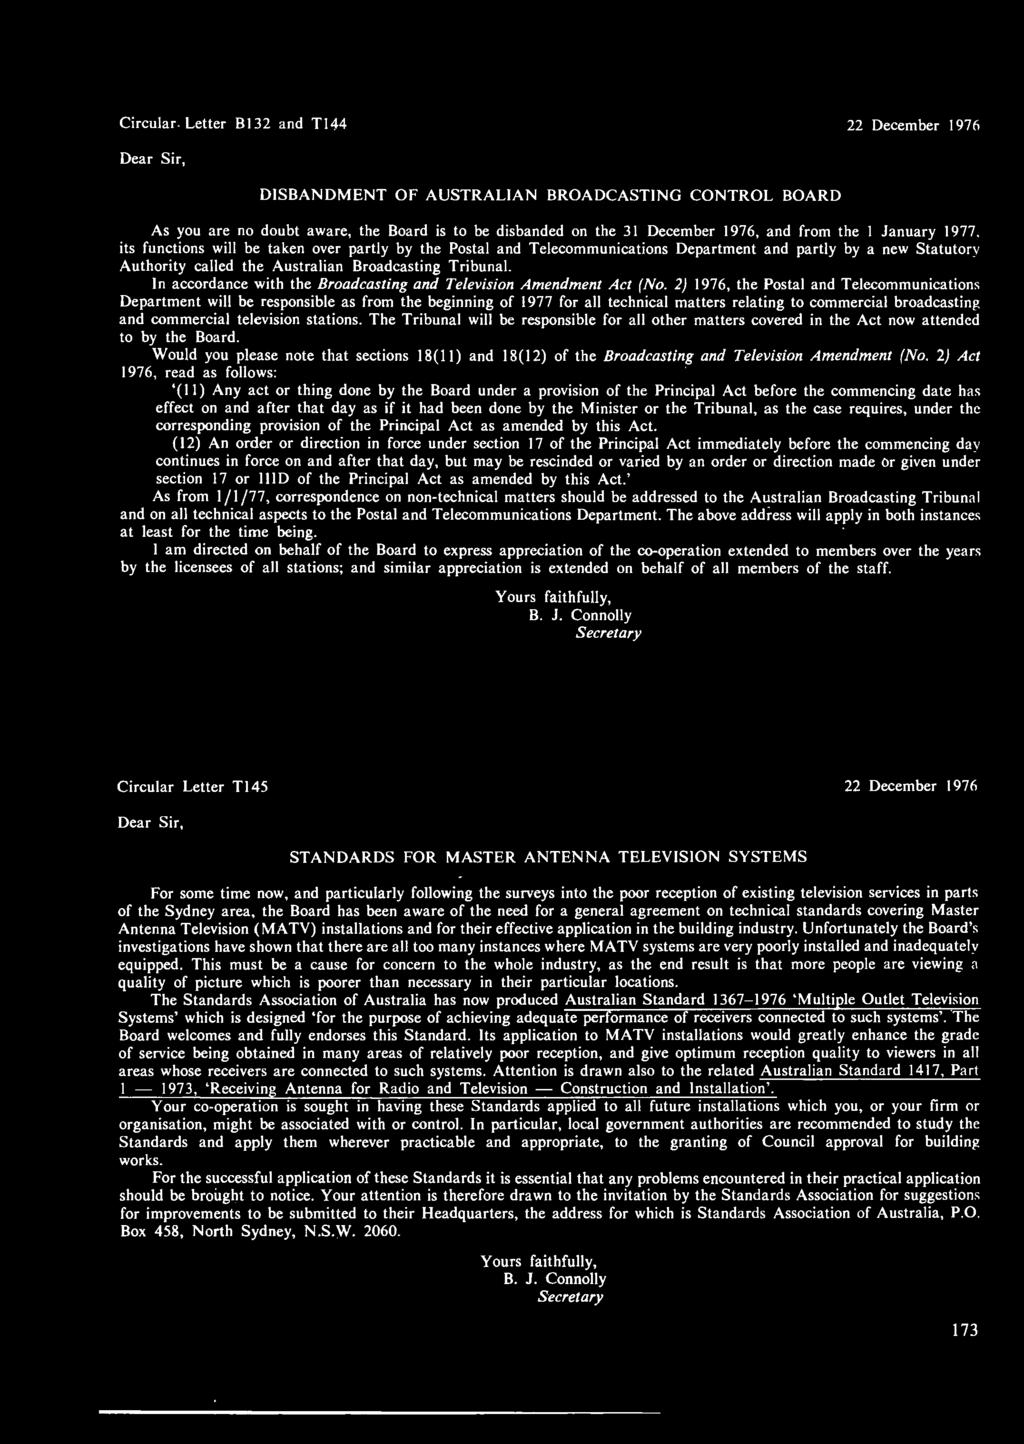 Circular- Letter Bl and Tl December 97 Dear Sir, DSBANDMENT OF AUSTRALAN BROADCASTNG CONTROL BOARD As you are no doubt aware, the Board is to be disbanded on the December 97, and from the January 977.